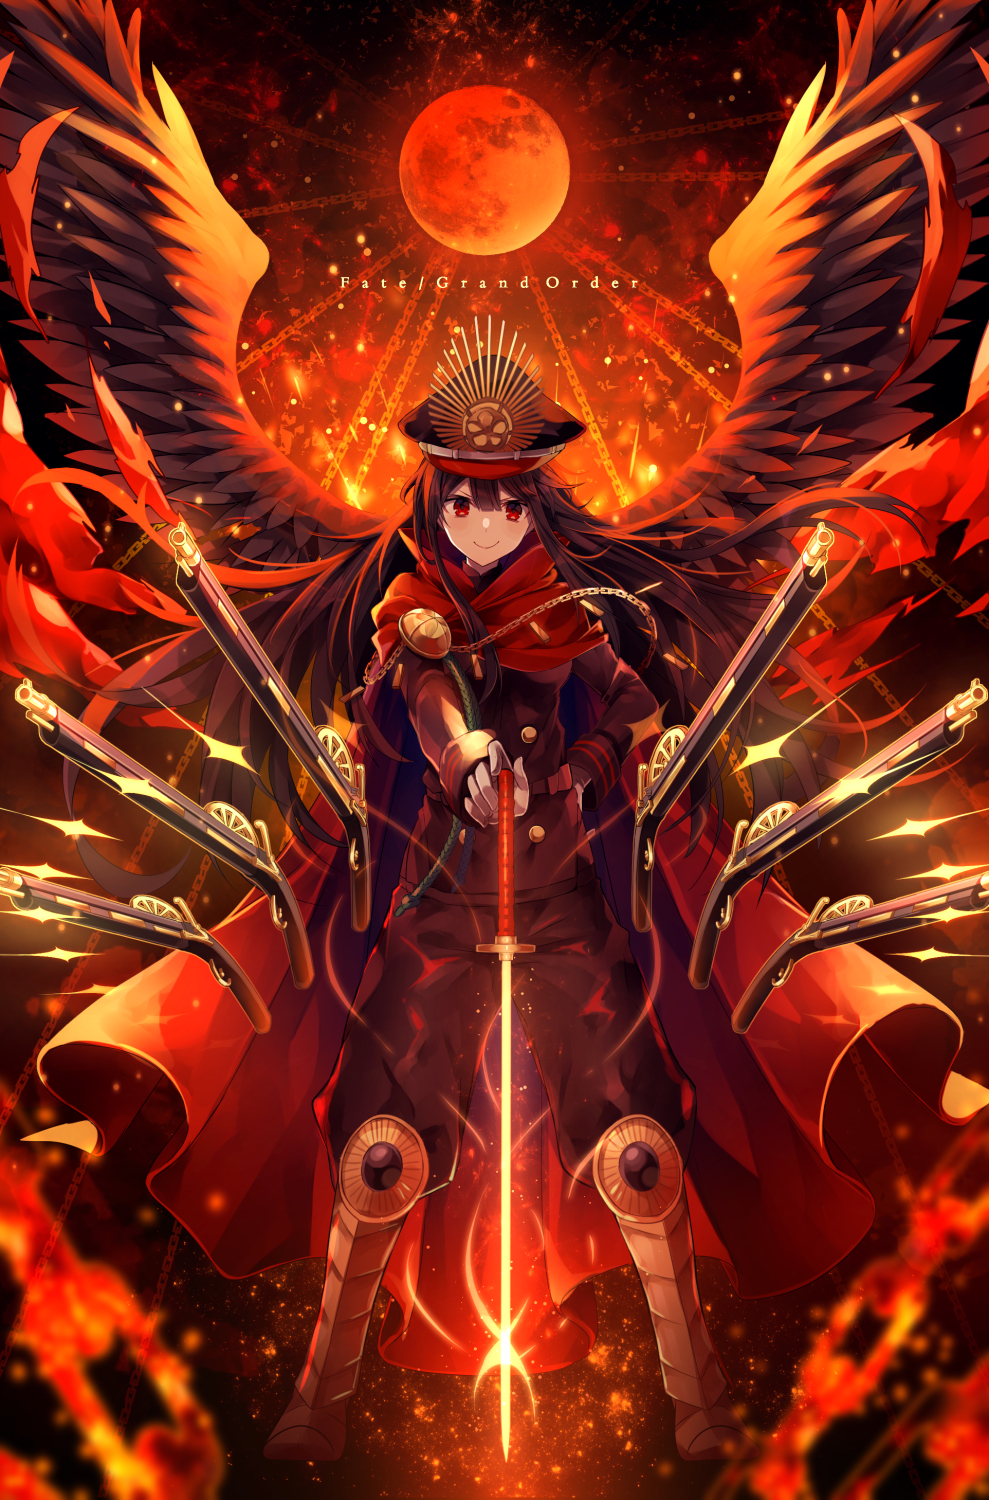 1girl armor armored_boots bangs black_hair black_wings blurry blush boots chains cloak closed_mouth copyright_name demon_archer depth_of_field fate/grand_order fate_(series) feathered_wings floating_hair gun hair_between_eyes hat highres holding holding_sword holding_weapon koha-ace legs_apart long_hair looking_at_viewer military military_uniform musket peaked_cap planted_sword planted_weapon red_eyes rising_sun smile smug solo standing sunburst sword uniform weapon wings yuxx_yux